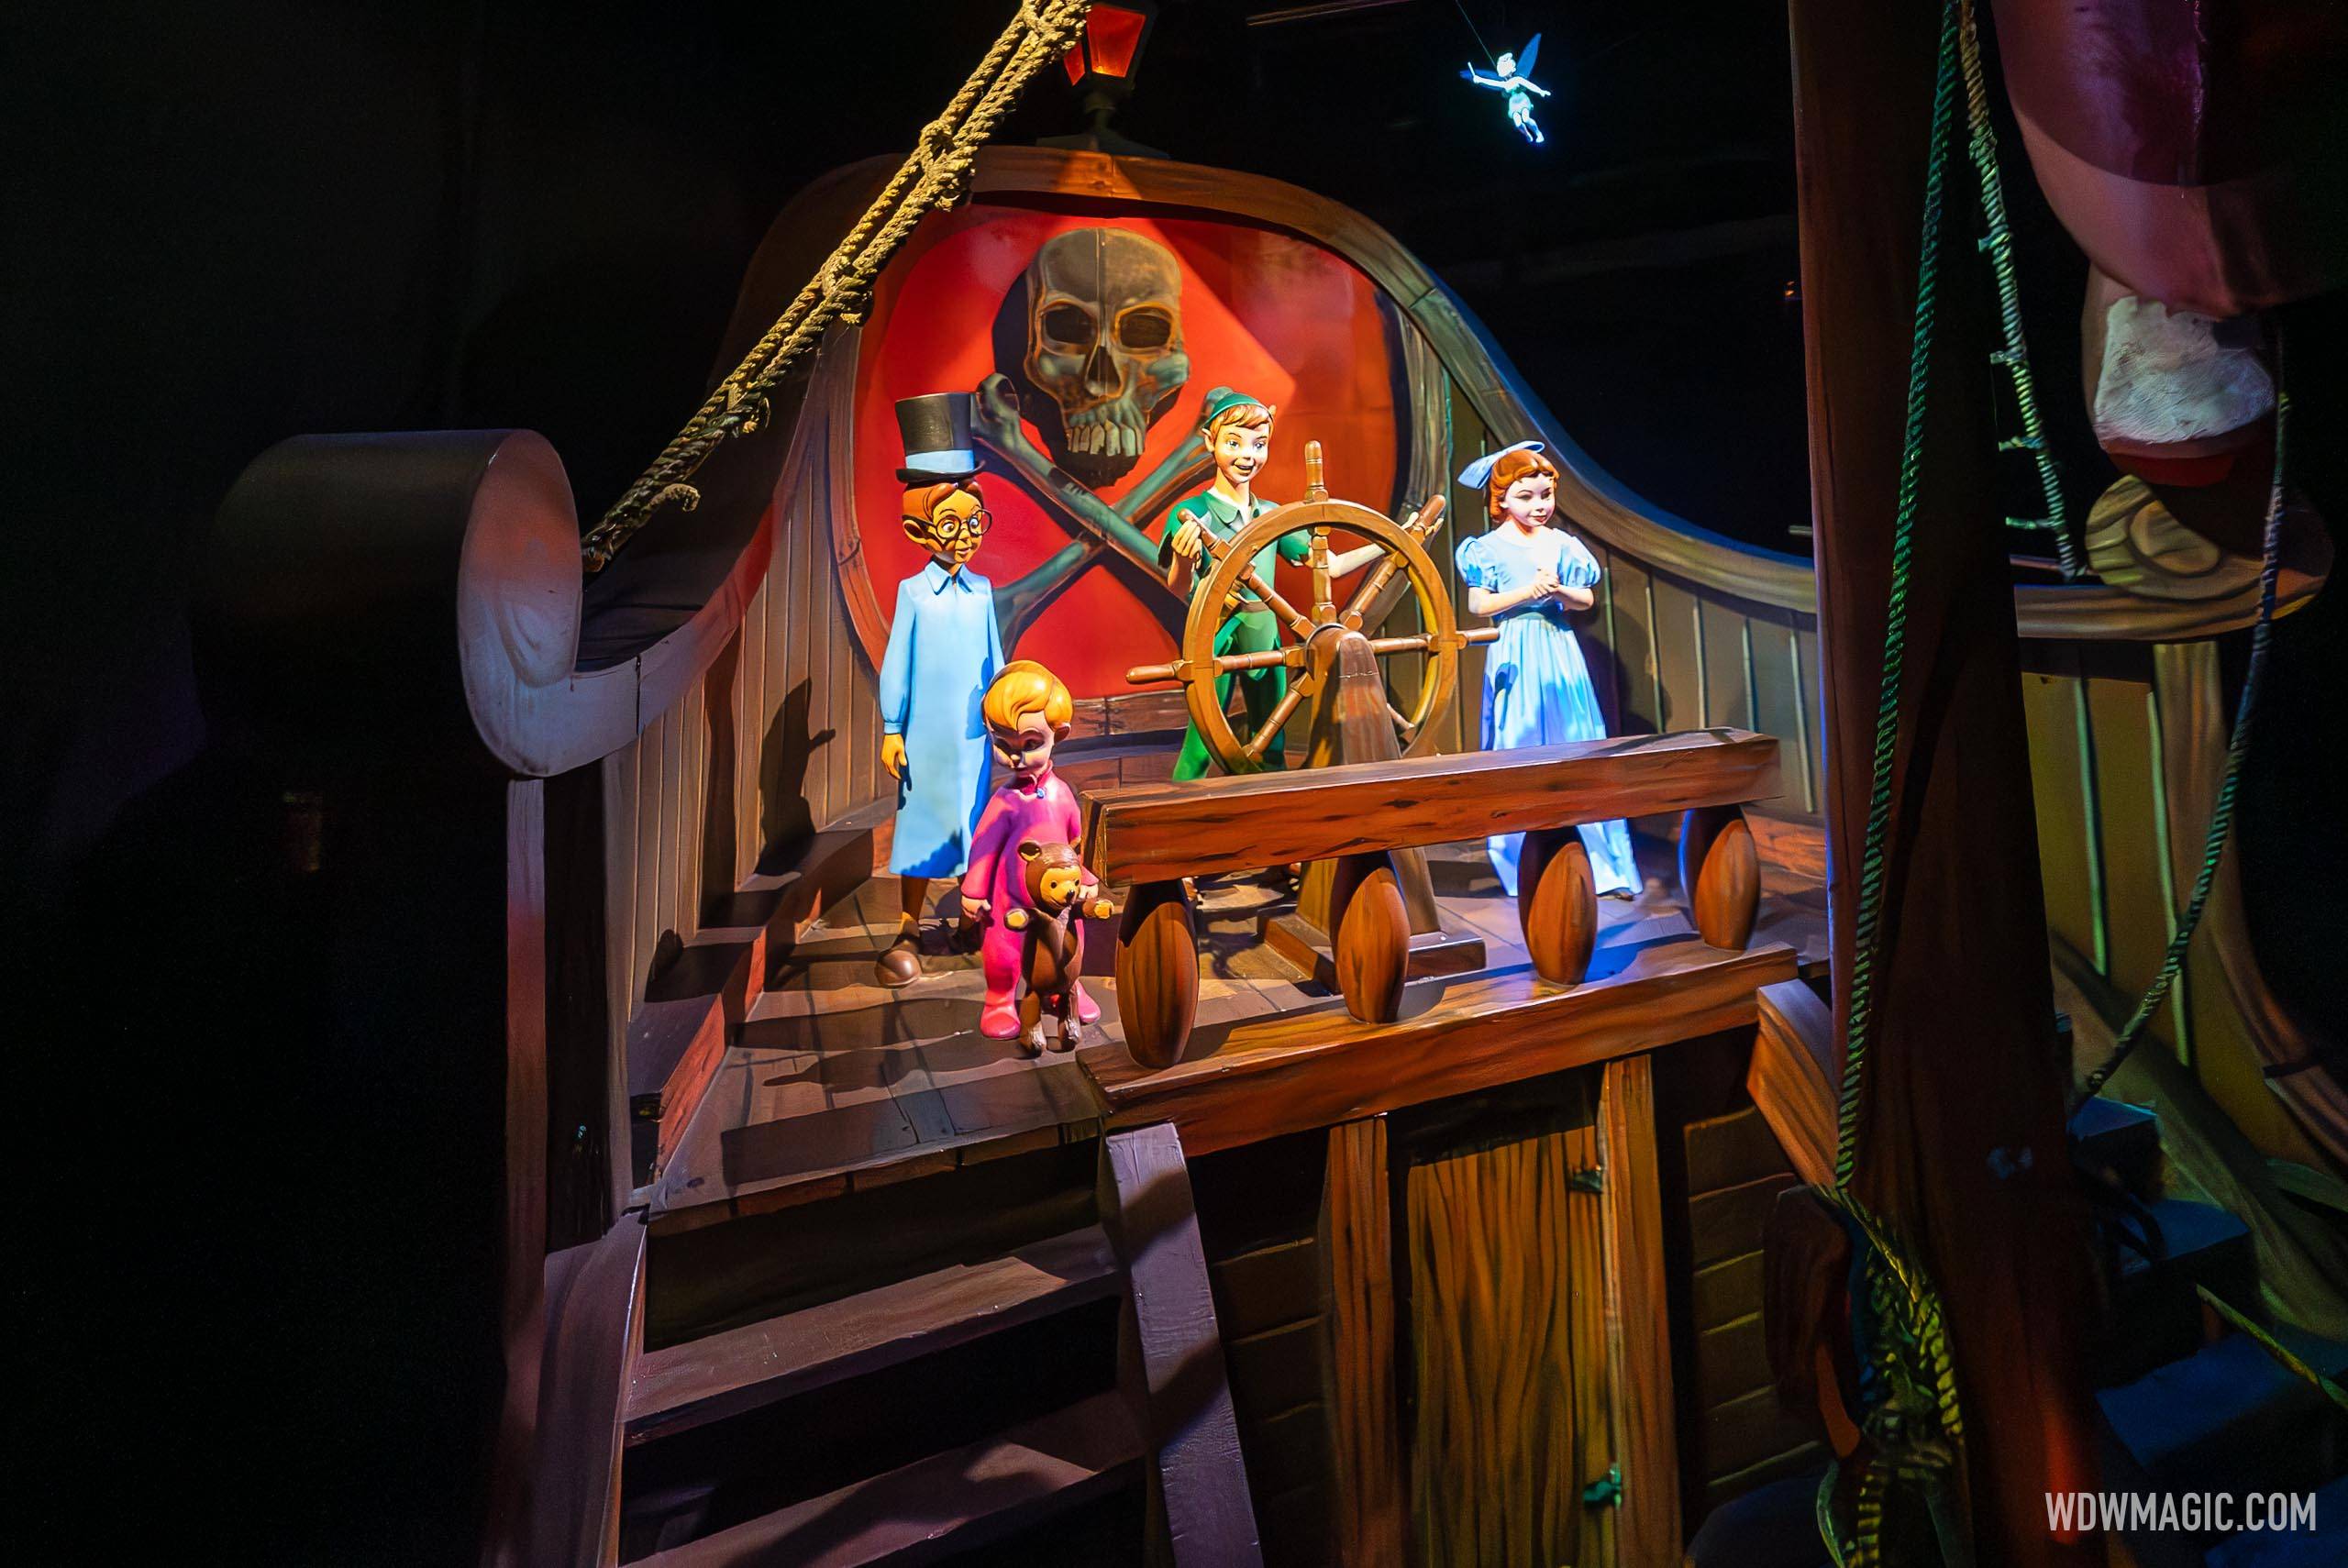 Peter Pan's Flight refurbishment pushed back a few days and extended